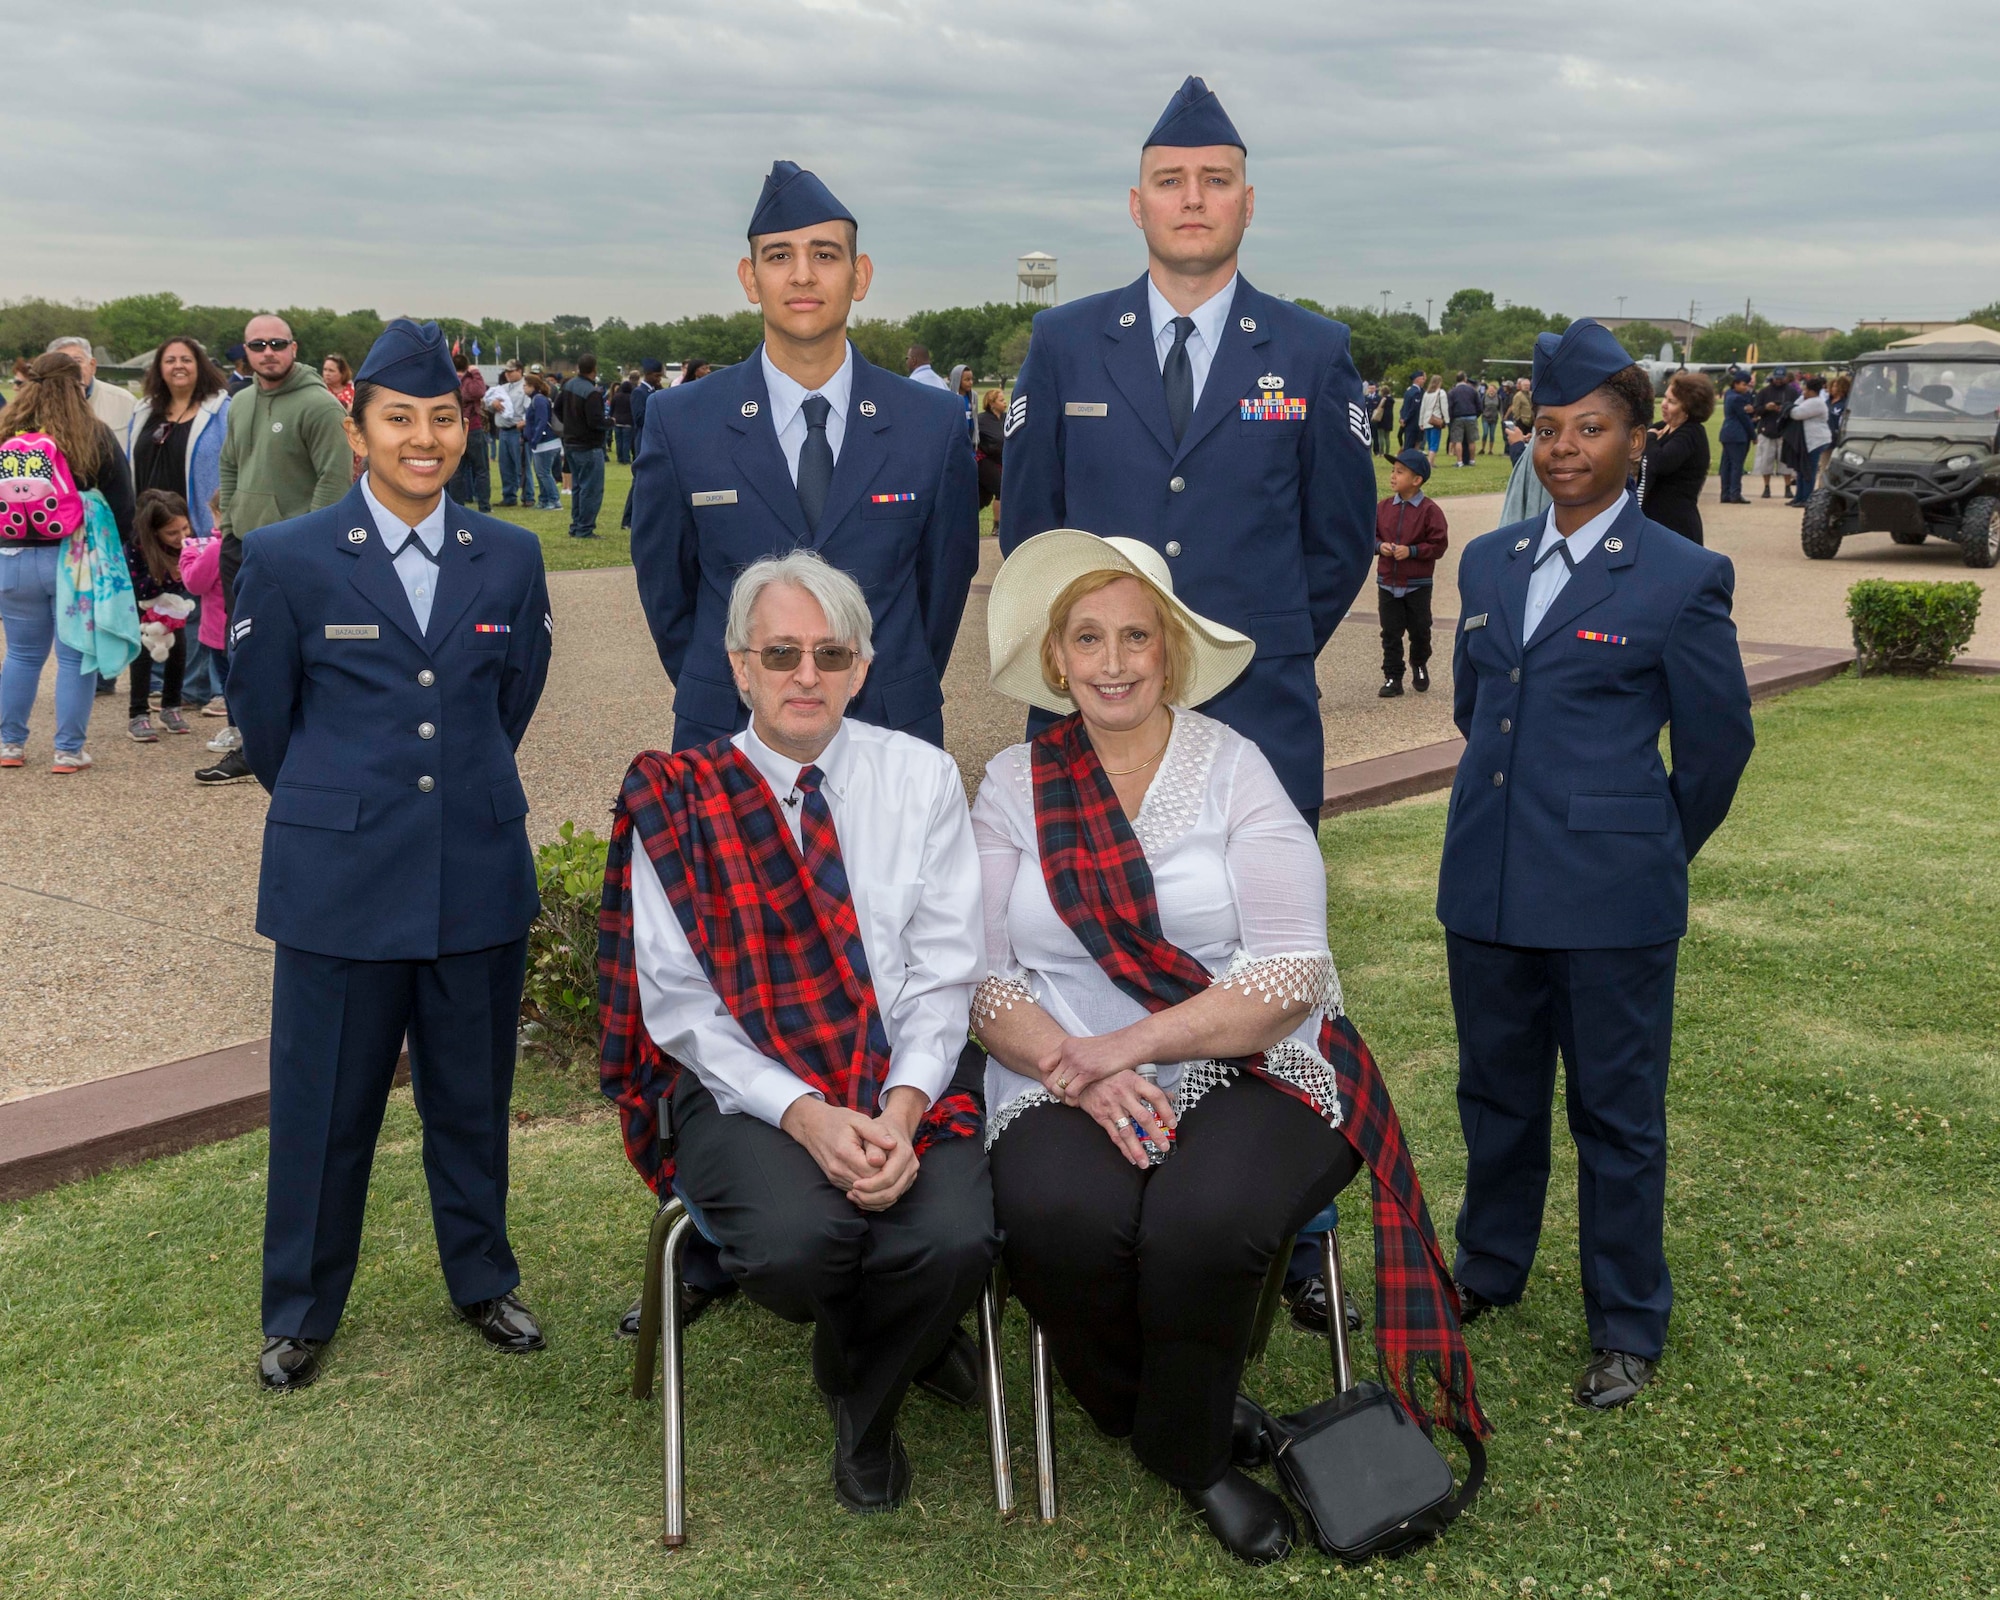 David Lackland (Center) and his wife Eileen take a group photo at Joint Base San Antonio-Lackland, Texas after a basic military training graduation ceremony April 20, 2018. David is the cousin of Brig. Gen. Frank D. Lackland, the namesake of JBSA-Lackland. Today is the first time David and Eileen have viewed a BMT graduation. (U.S. Air Force photo by Ismael Ortega / Released)